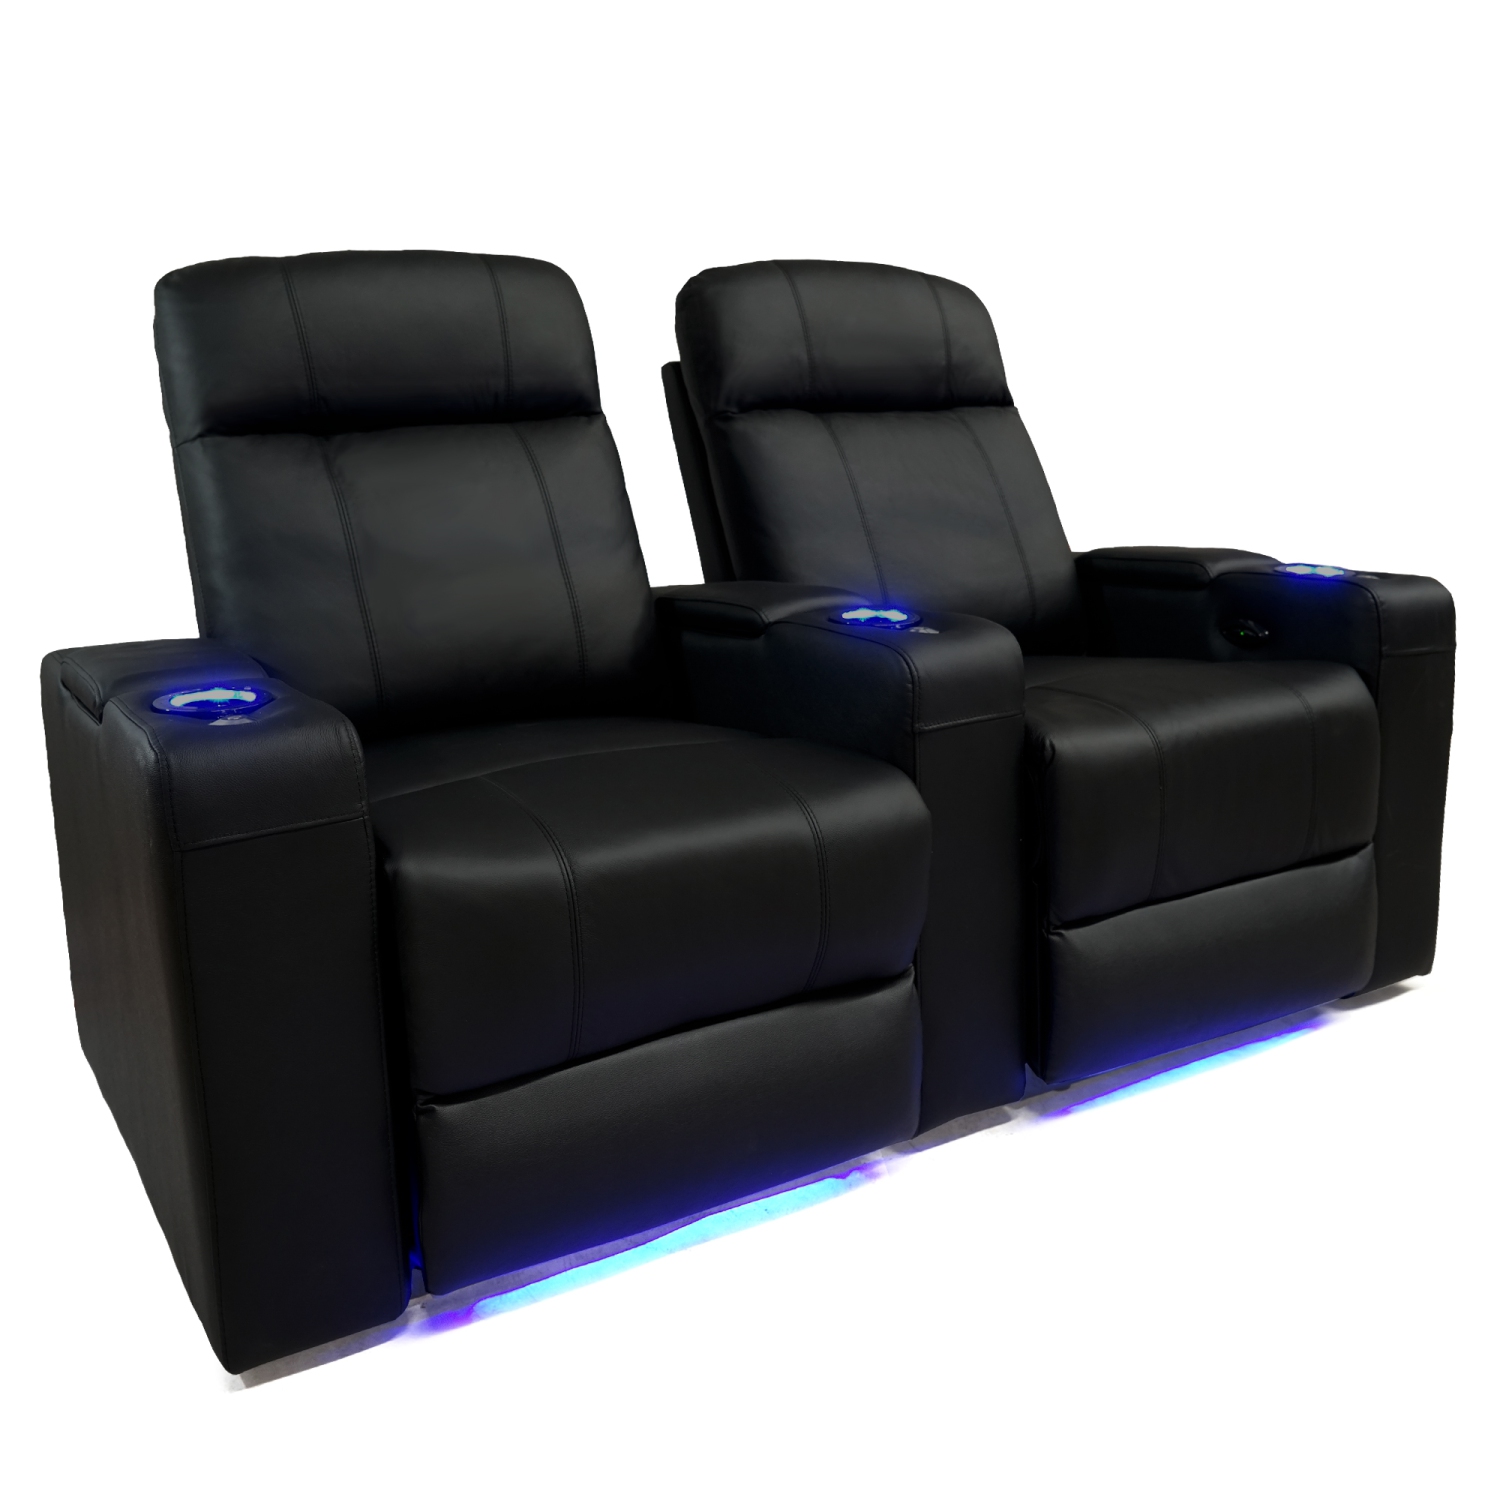 Valencia Piacenza Motorized Home, Leather Theater Recliners